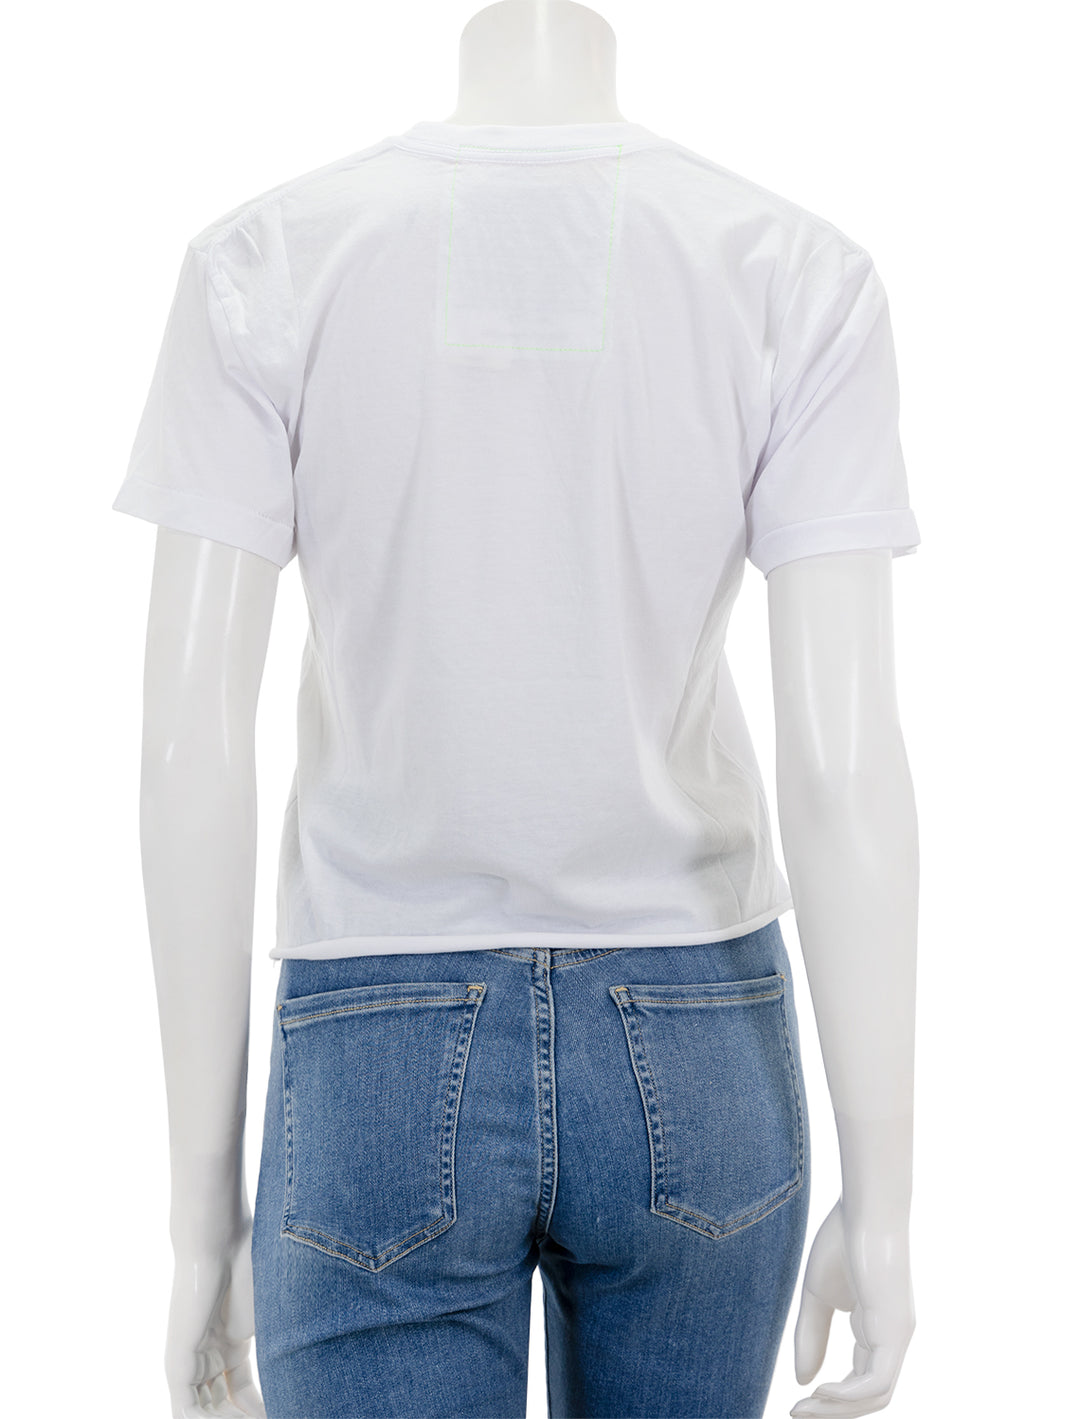 Back view of Aviator Nation's smiley 2 boyfriend tee in white.